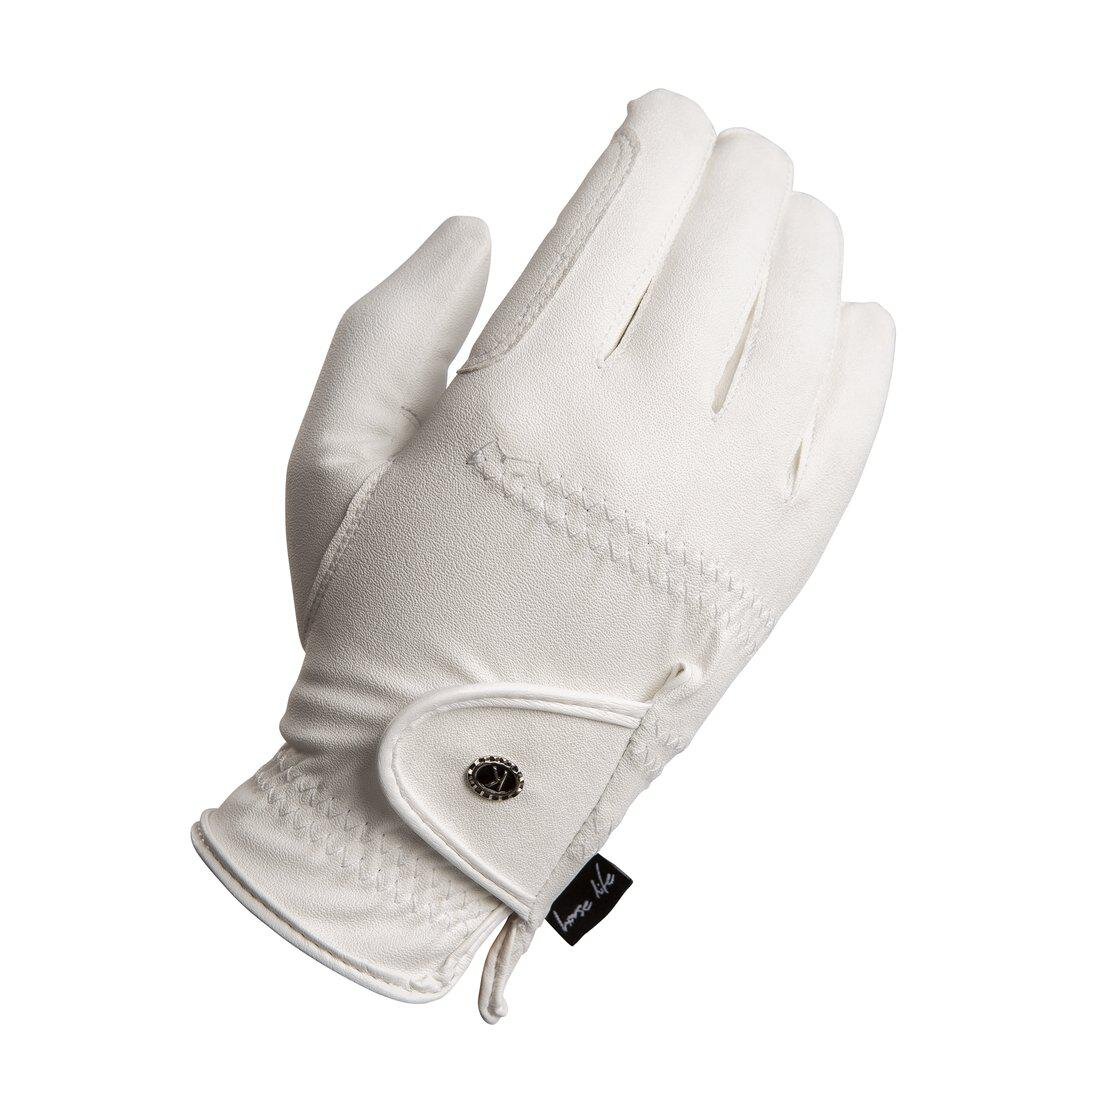 Synthetic Leather Riding Gloves - White